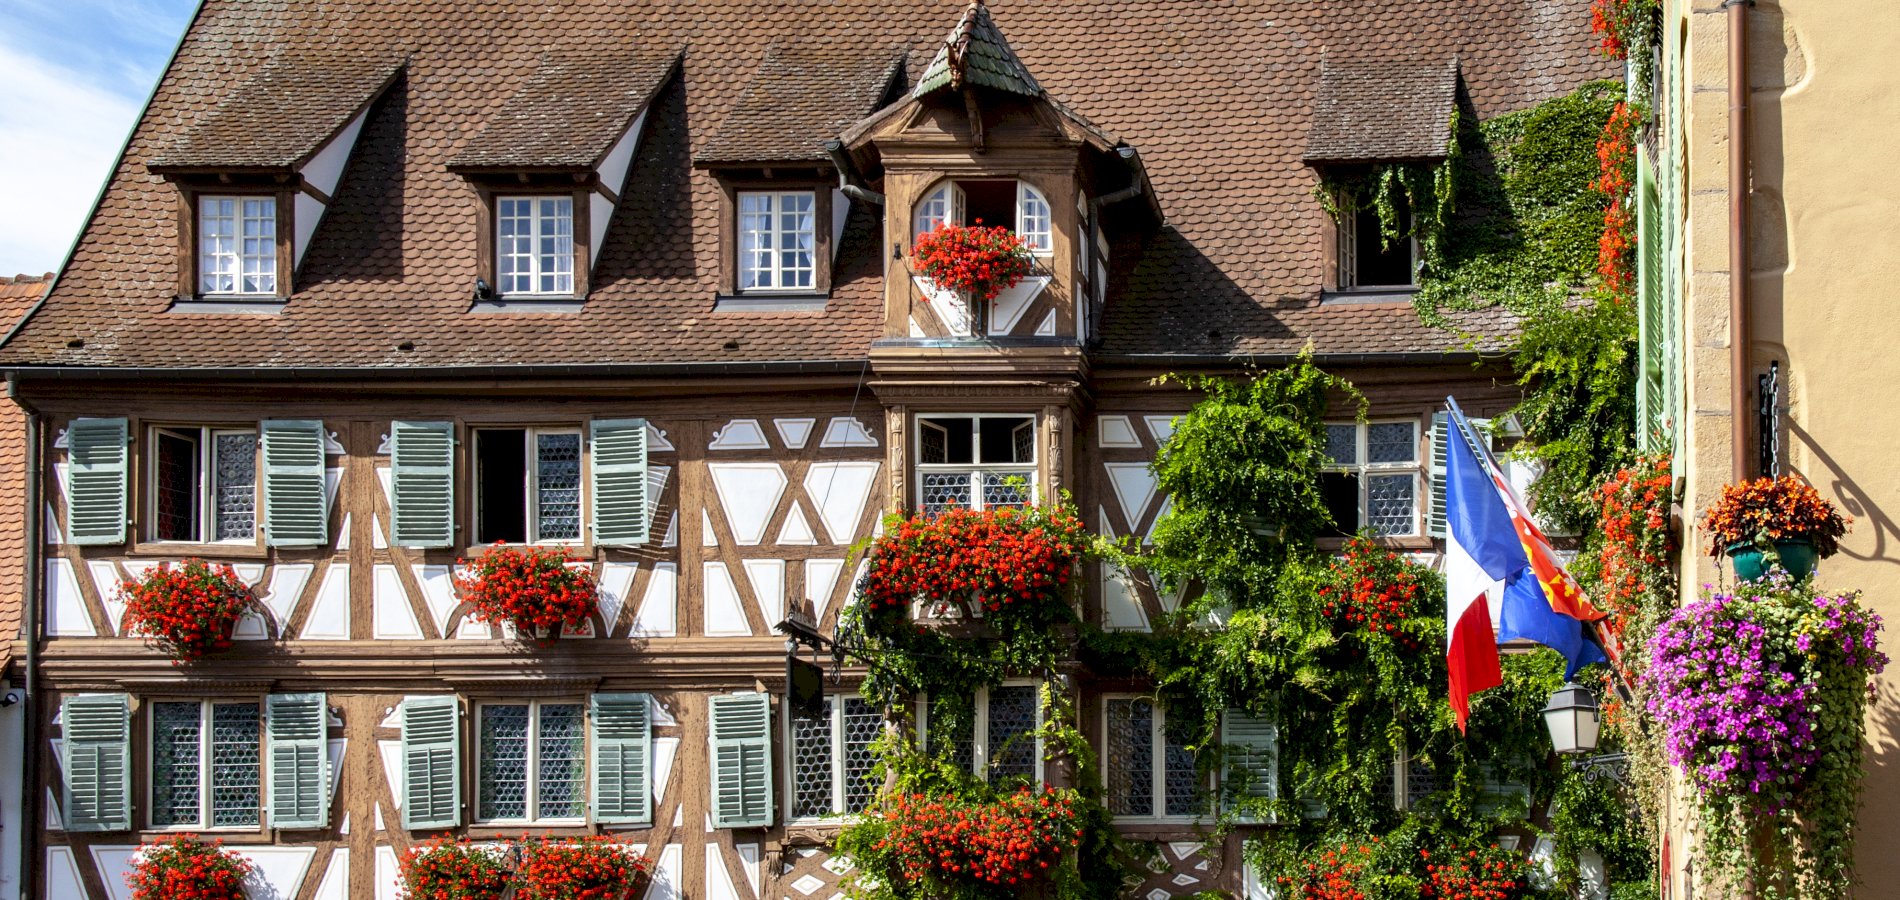 Ophorus Tours - A Private Day Trip From Colmar to Eguisheim, Riquewihr & Haut Koenigsbourg for 2 persons